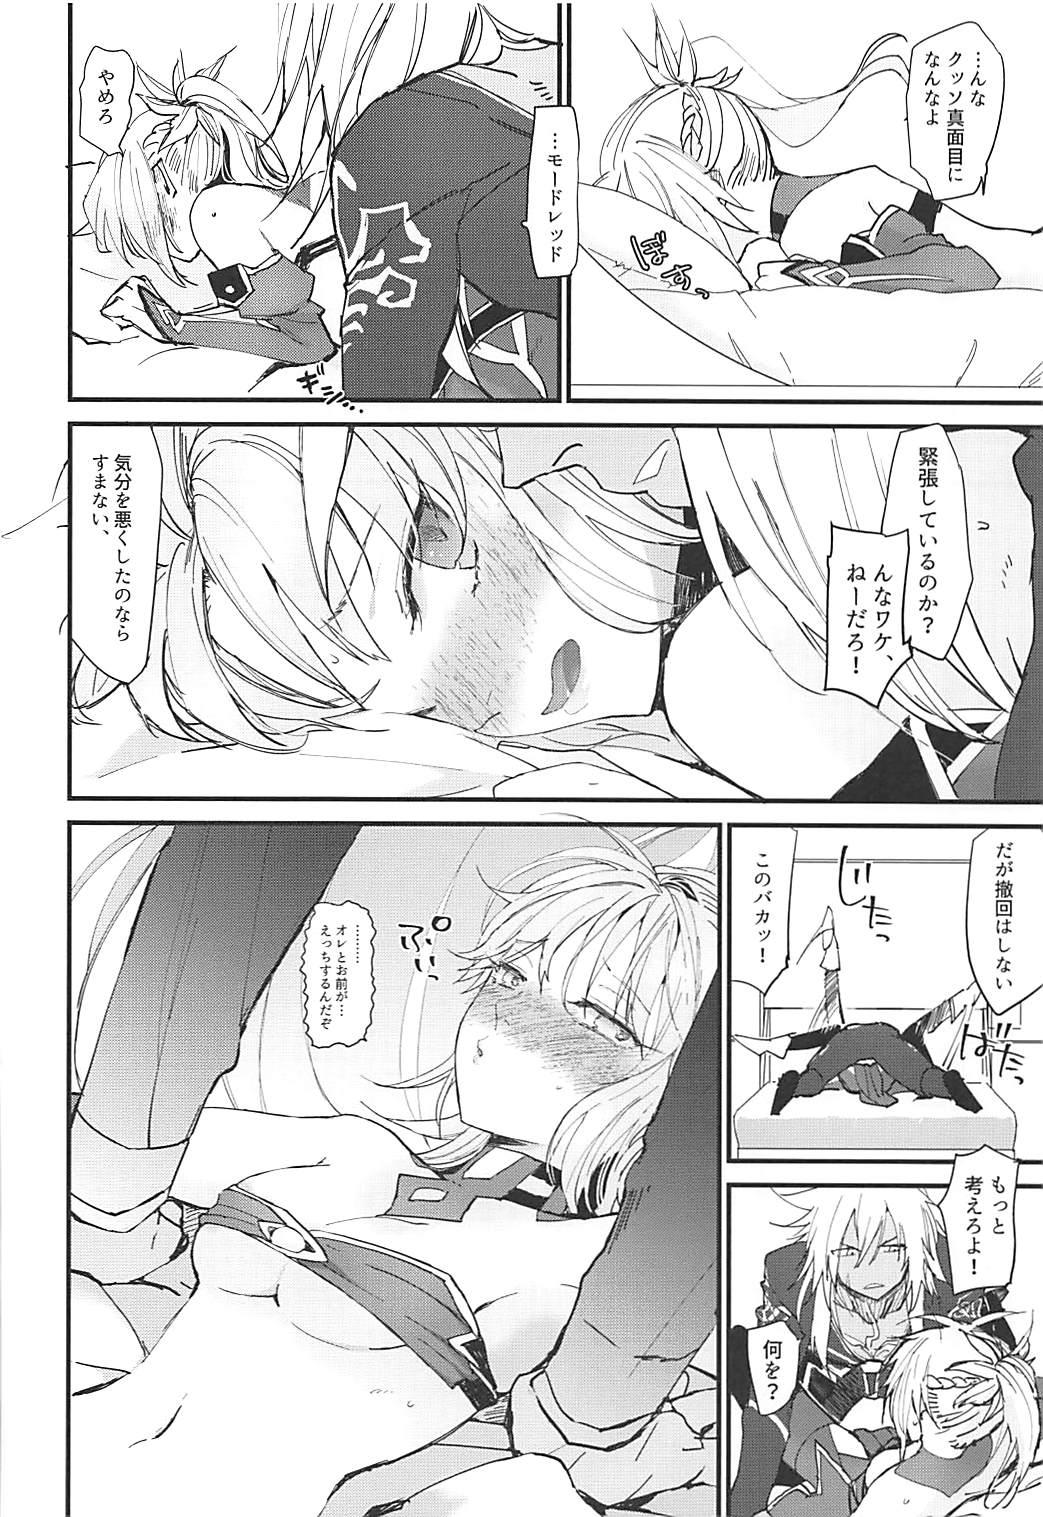 Show THE WARRIORS' REST - Fate grand order Free Amateur - Page 8